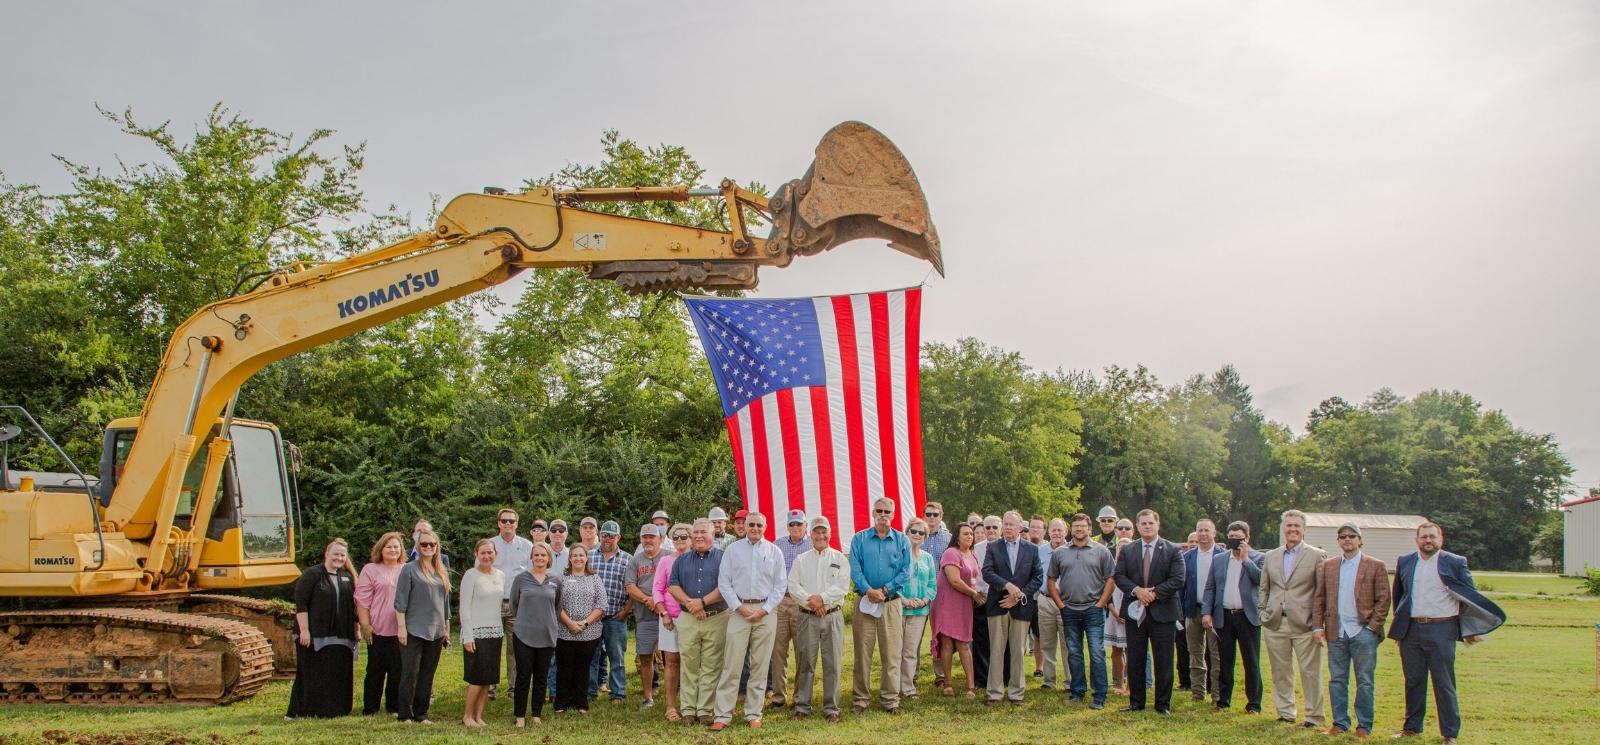 Hazel Green Alabama groundbreaking ceremony with American Flag in the background